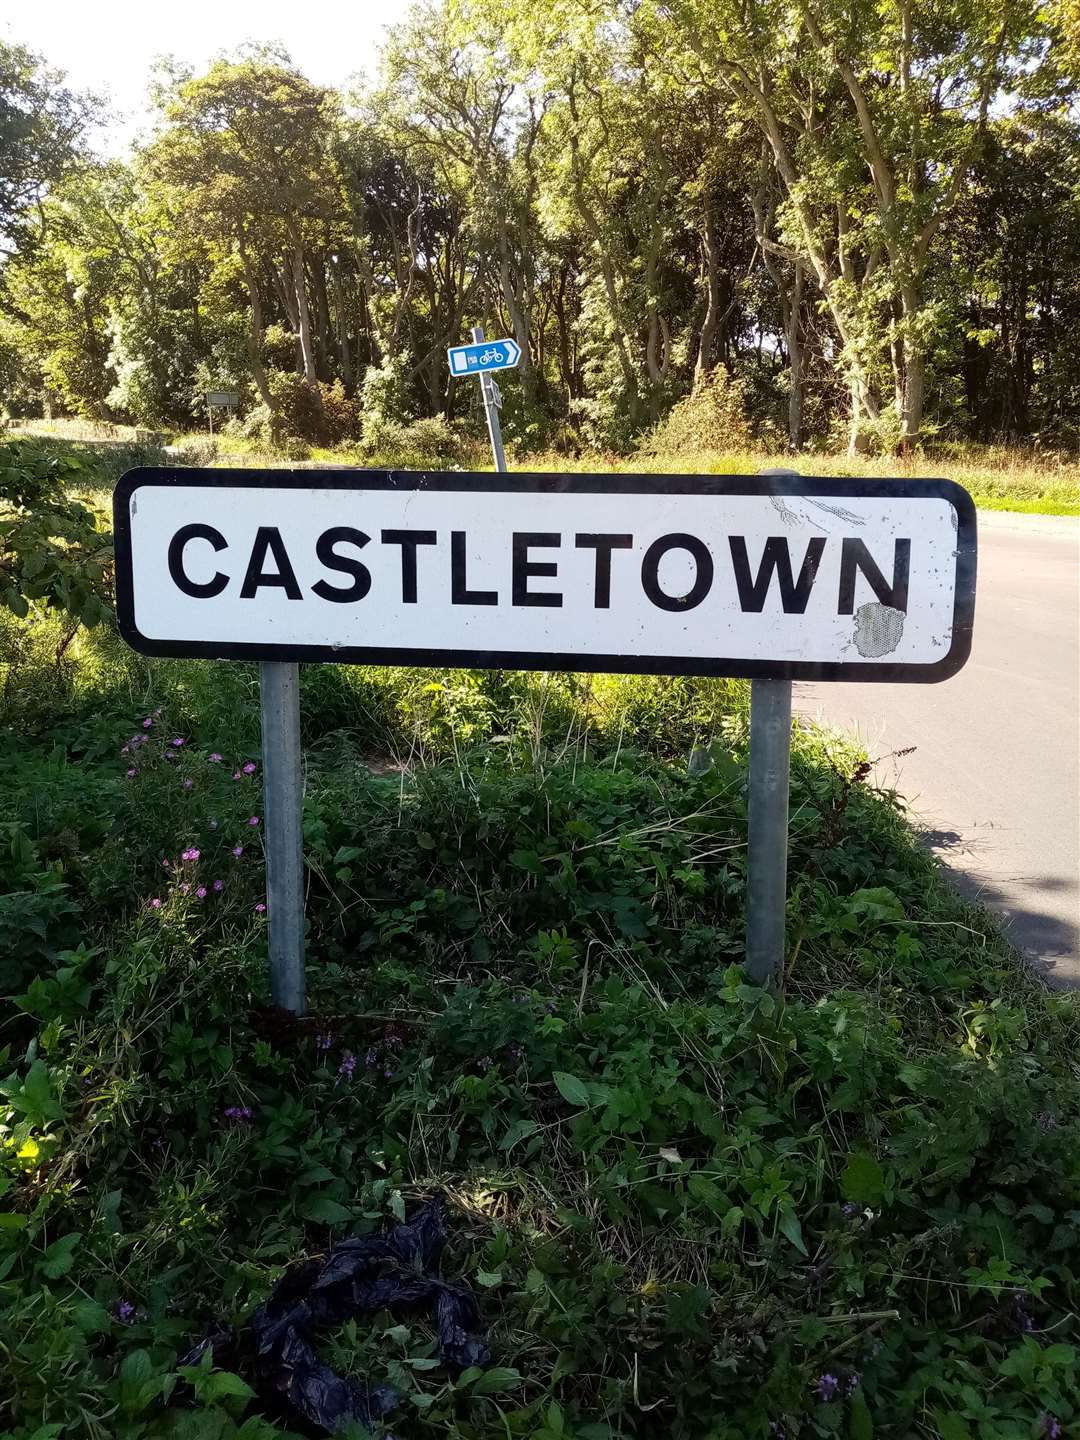 The Castletown sign at the old mill was removed but has been put back in place by council staff